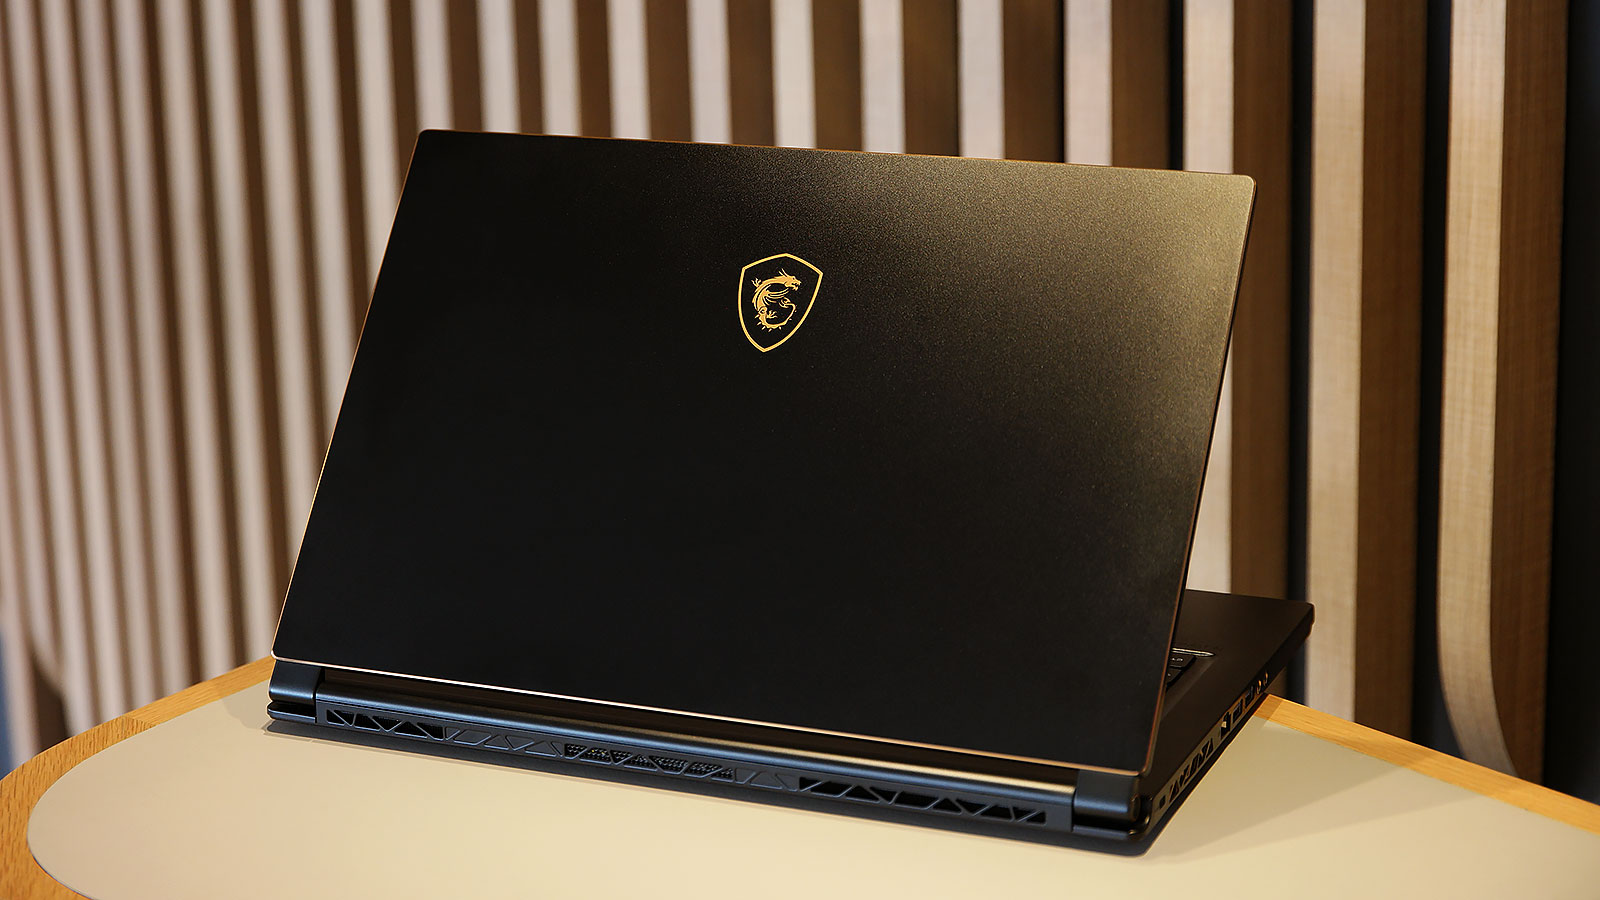 MSI’s GS65 Stealth Thin Is A Gaming Laptop Made For Adults